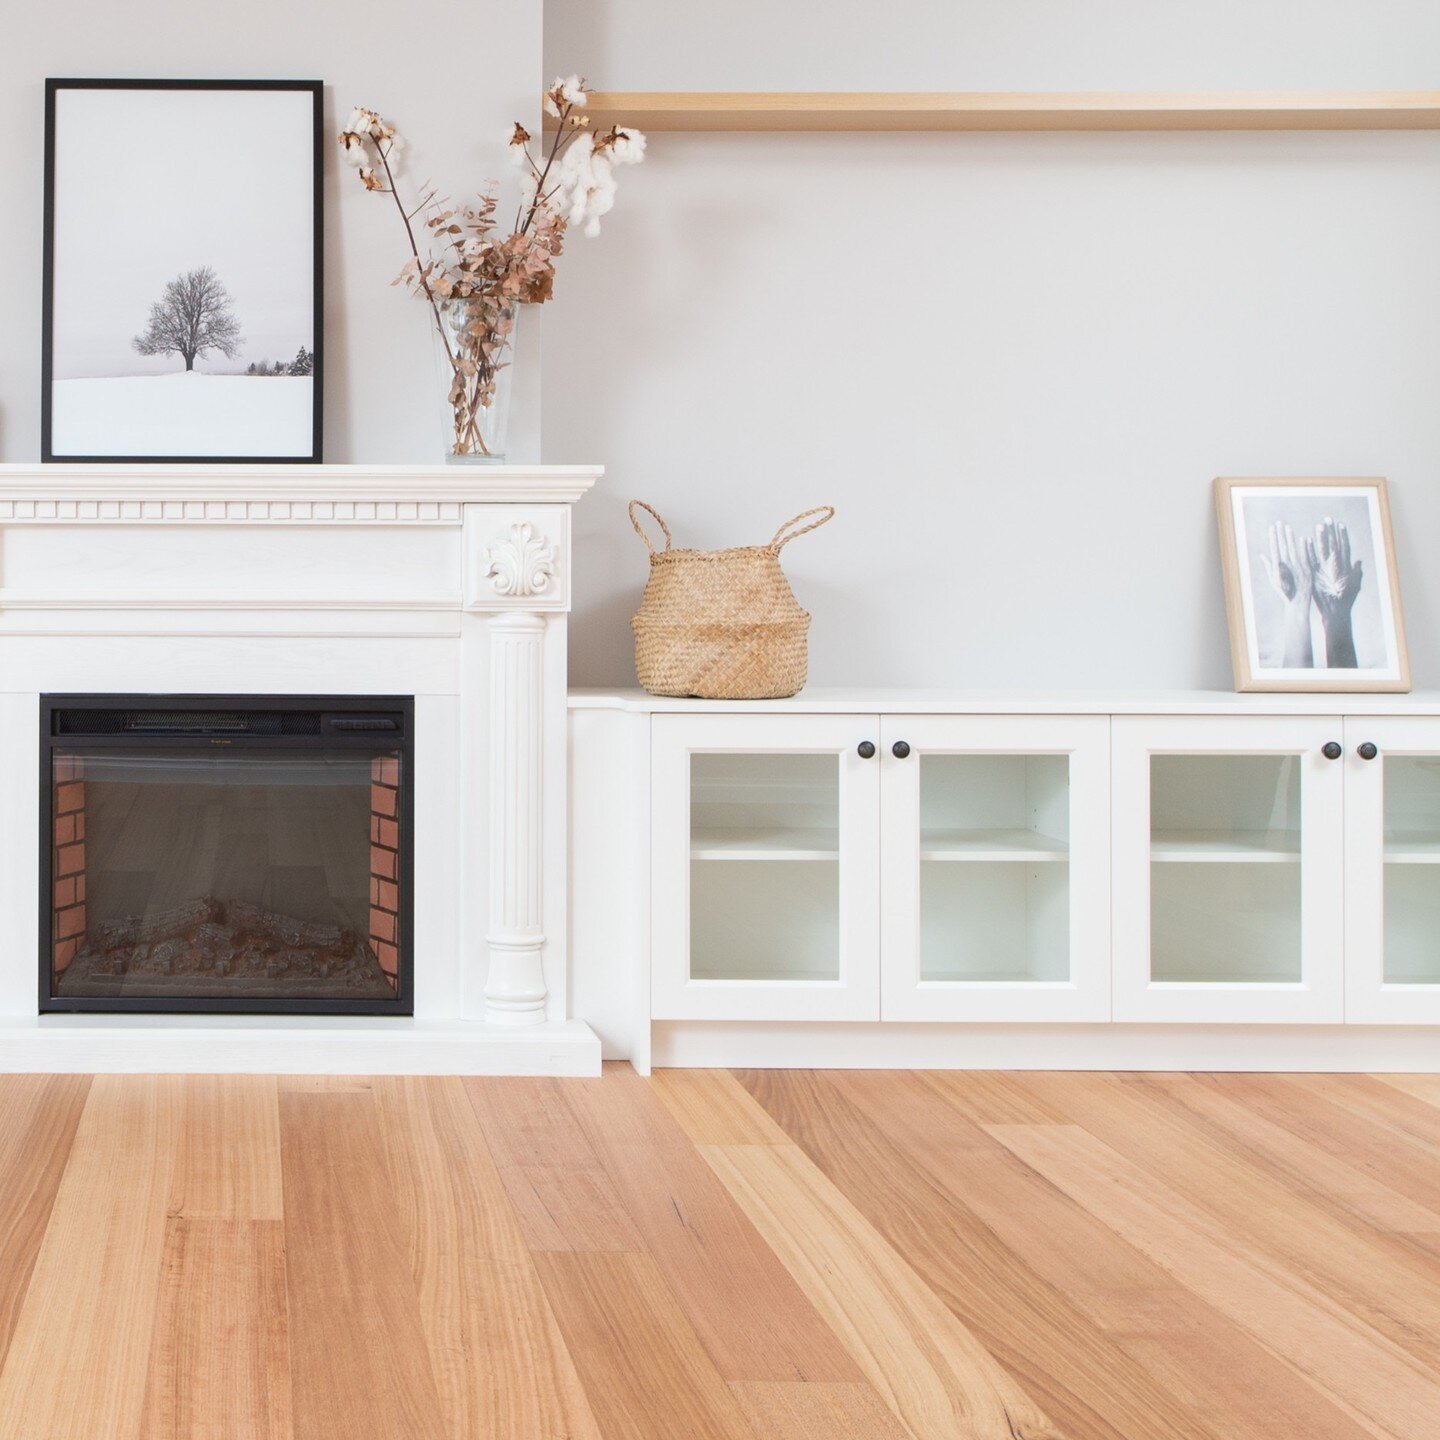 Bring the natural beauty of Tasmanian Oak Flooring to your home with Abelwood's premium Tasmanian Oak Flooring range from NSFP.

Abelwood's 19mm Solid End Matched Structural Flooring is available in Prime and Classic grades, allowing you to choose be